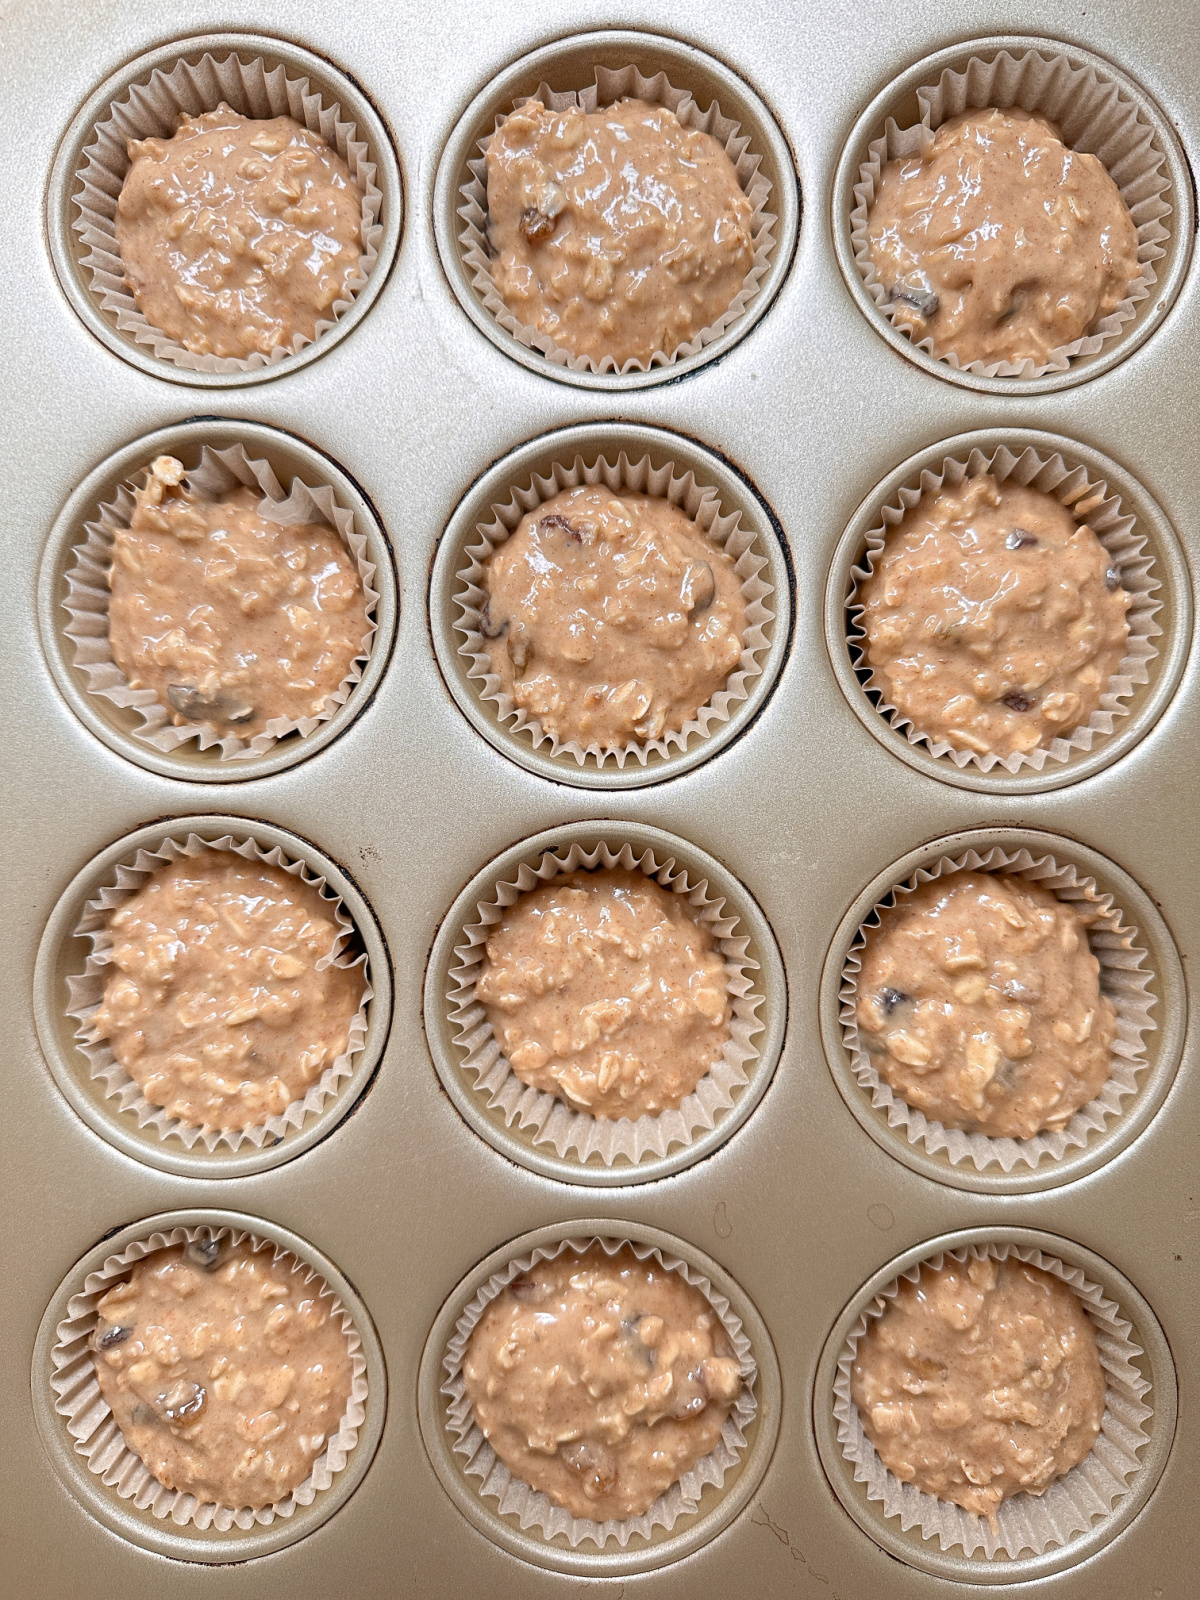 Oatmeal muffin batter in baking cups.